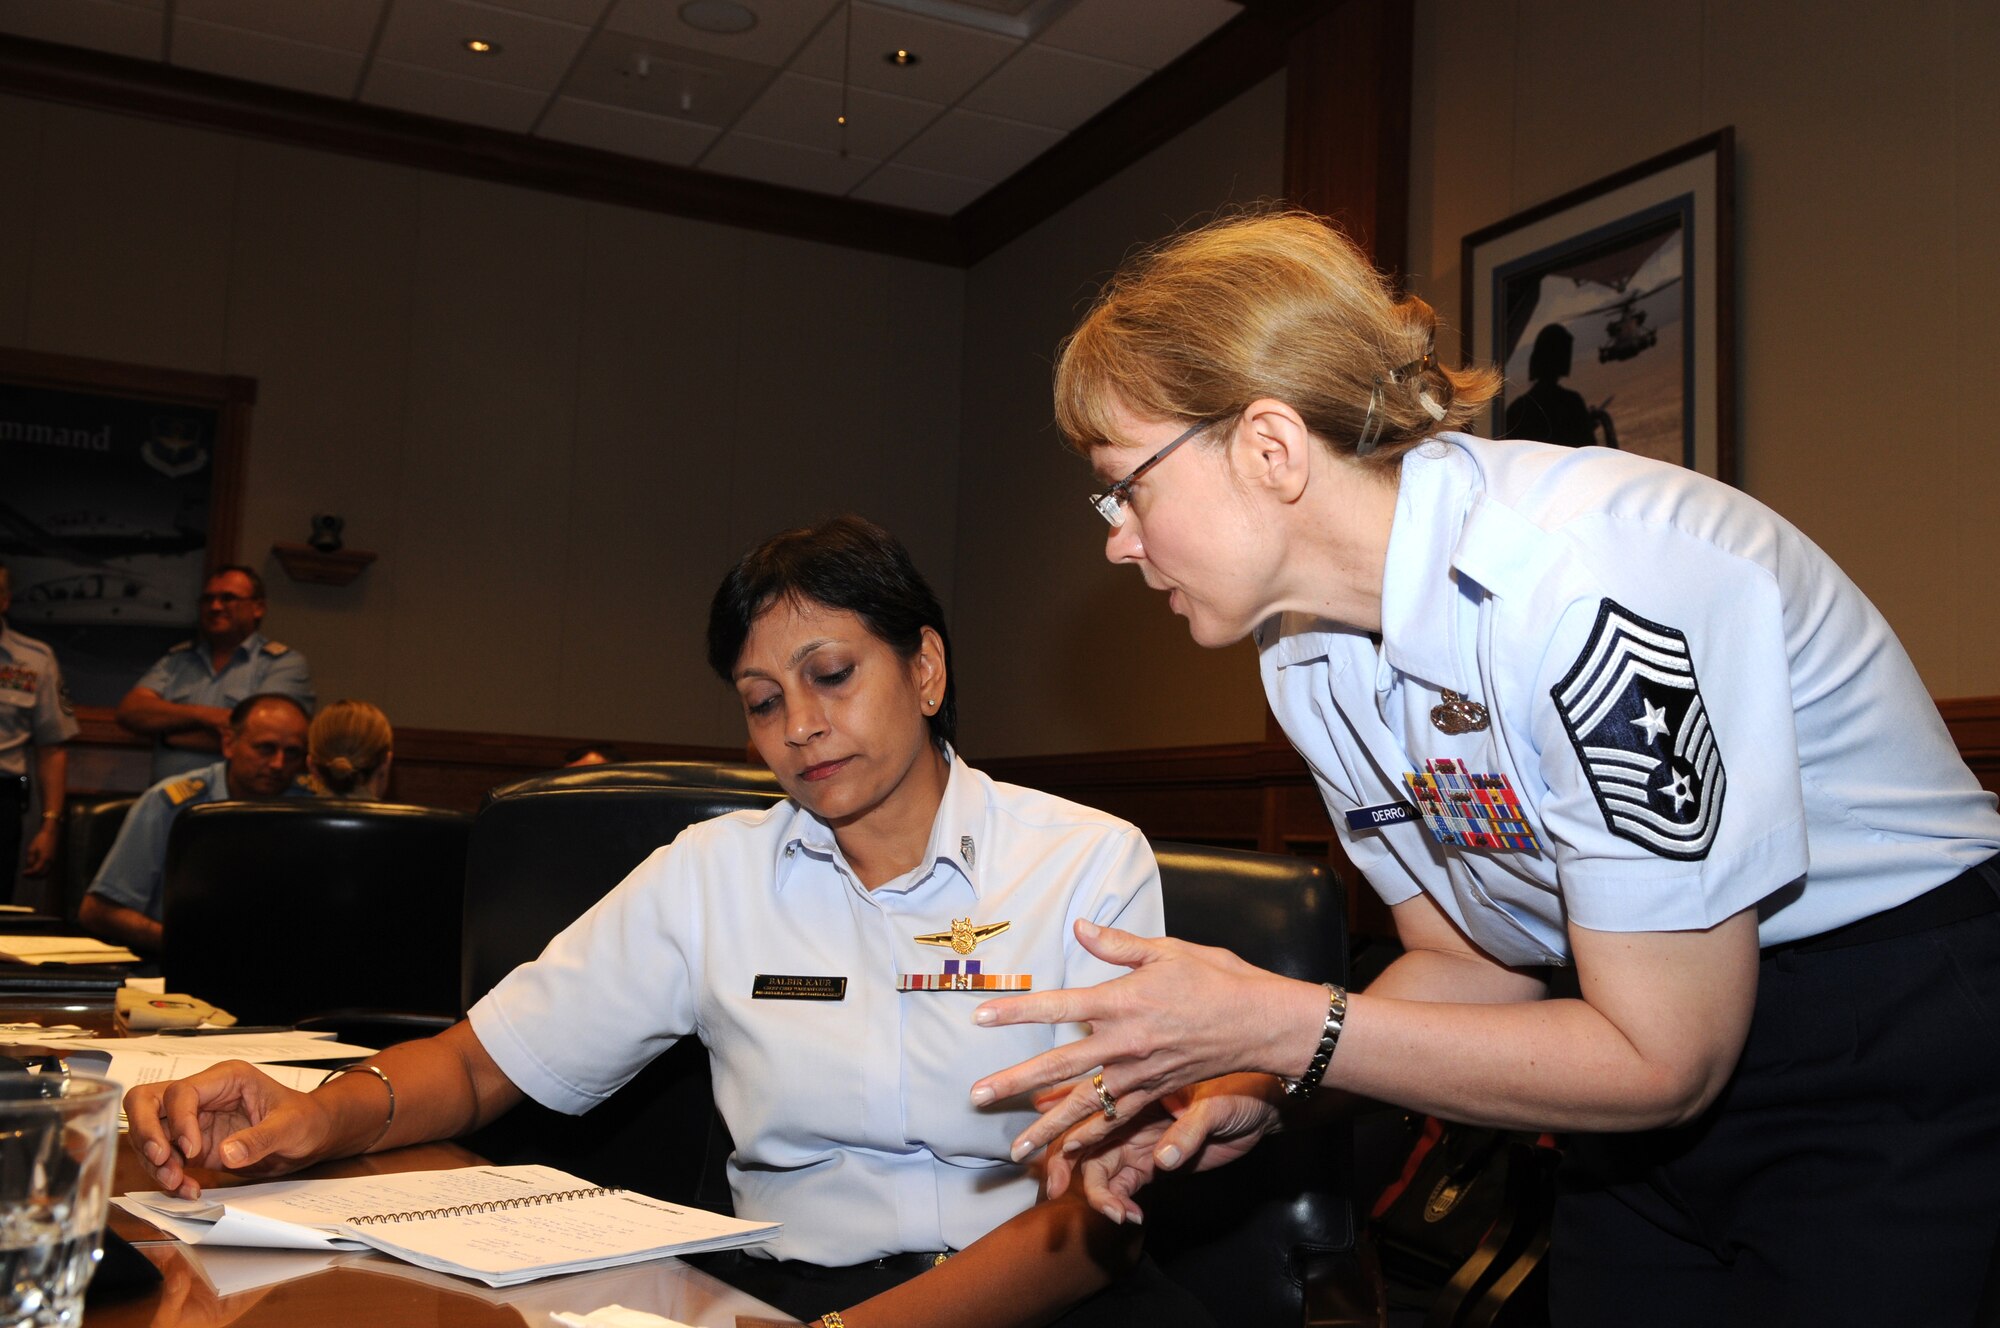 Chief Master Sgt. Pamela Derrow (right), U.S. Air Forces in Europe command chief, talks with Singapore air force Master Warrant Officer Balbir Kaur during the 2009 Worldwide Senior Enlisted Leaders Summit May 12-15 at Randolph Air Force Base, Texas. The visit was hosted by U.S. Air Force senior enlisted leaders to give their foreign counterparts a look at a U.S. Air Force enlisted member's career from start to finish. (U.S. Air Force photo/Rich McFadden)